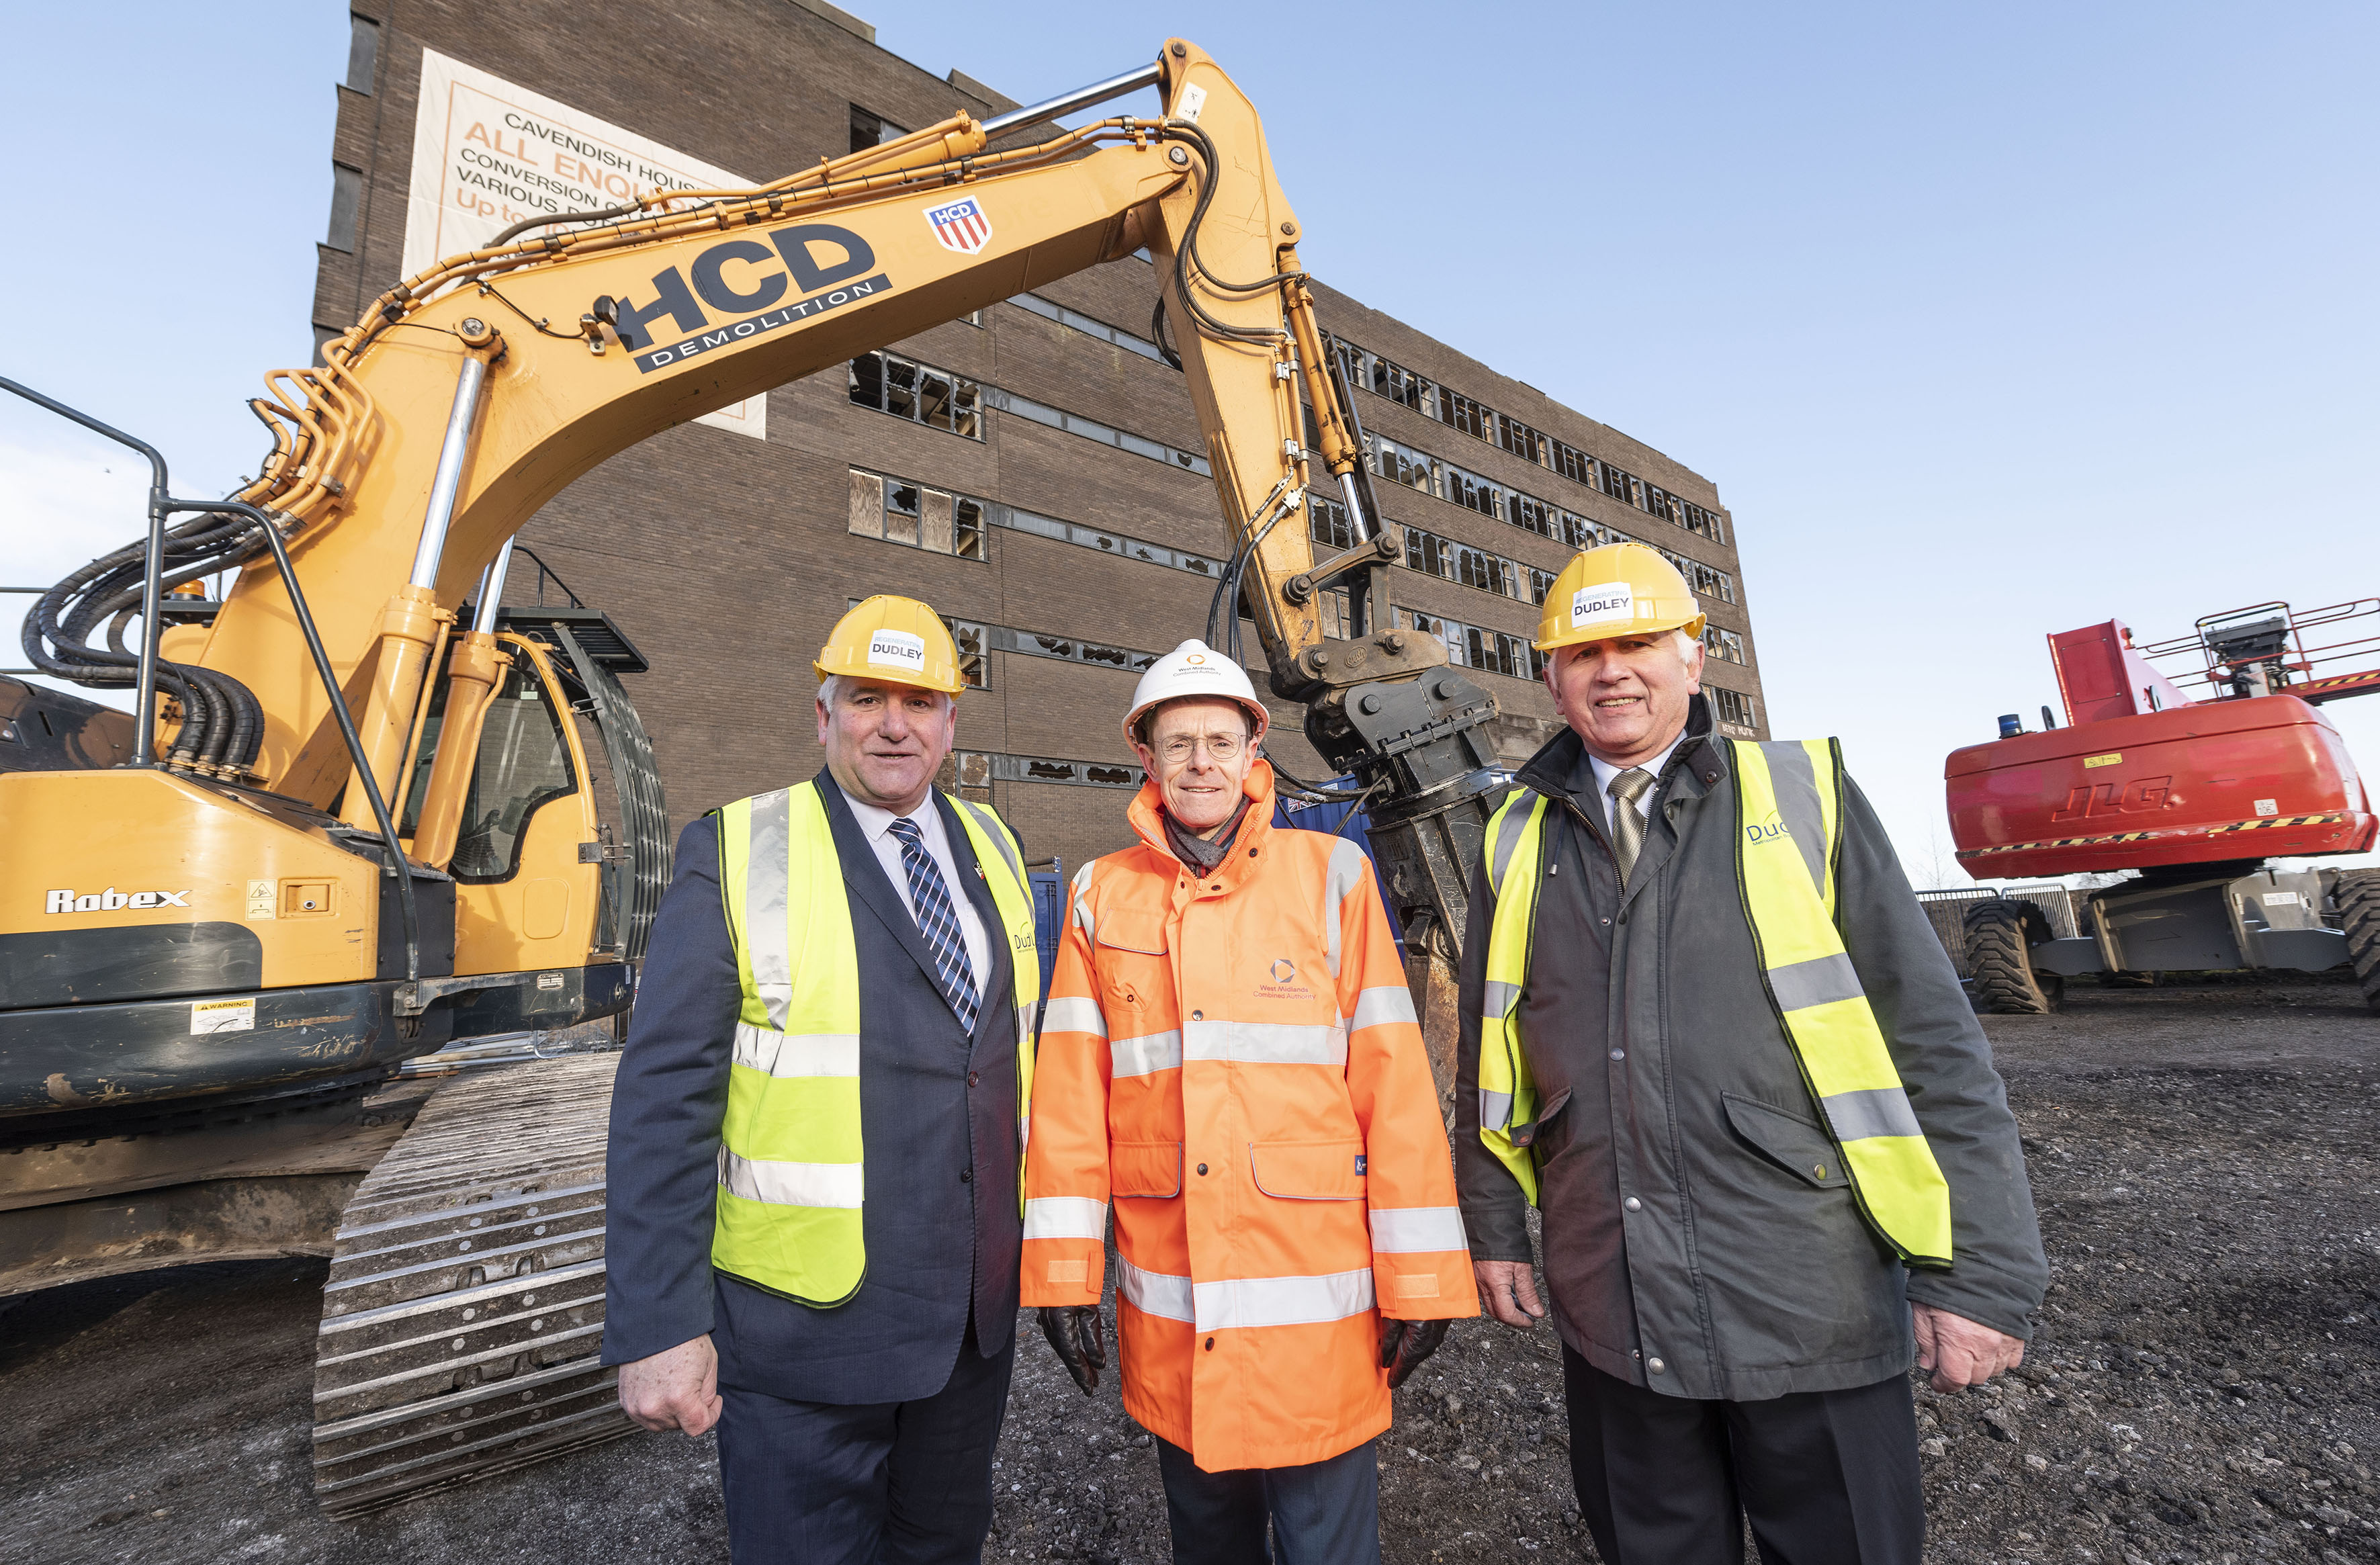 From left; Cllr Pat Harley, leader of Dudley Council, Mayor of the West Midlands Andy Street and Jeremy Knight-Adams, owner of developers Avenbury Dudley at the derelict Cavendish House which is set to be demolished after blighting the Dudley skyline for decades